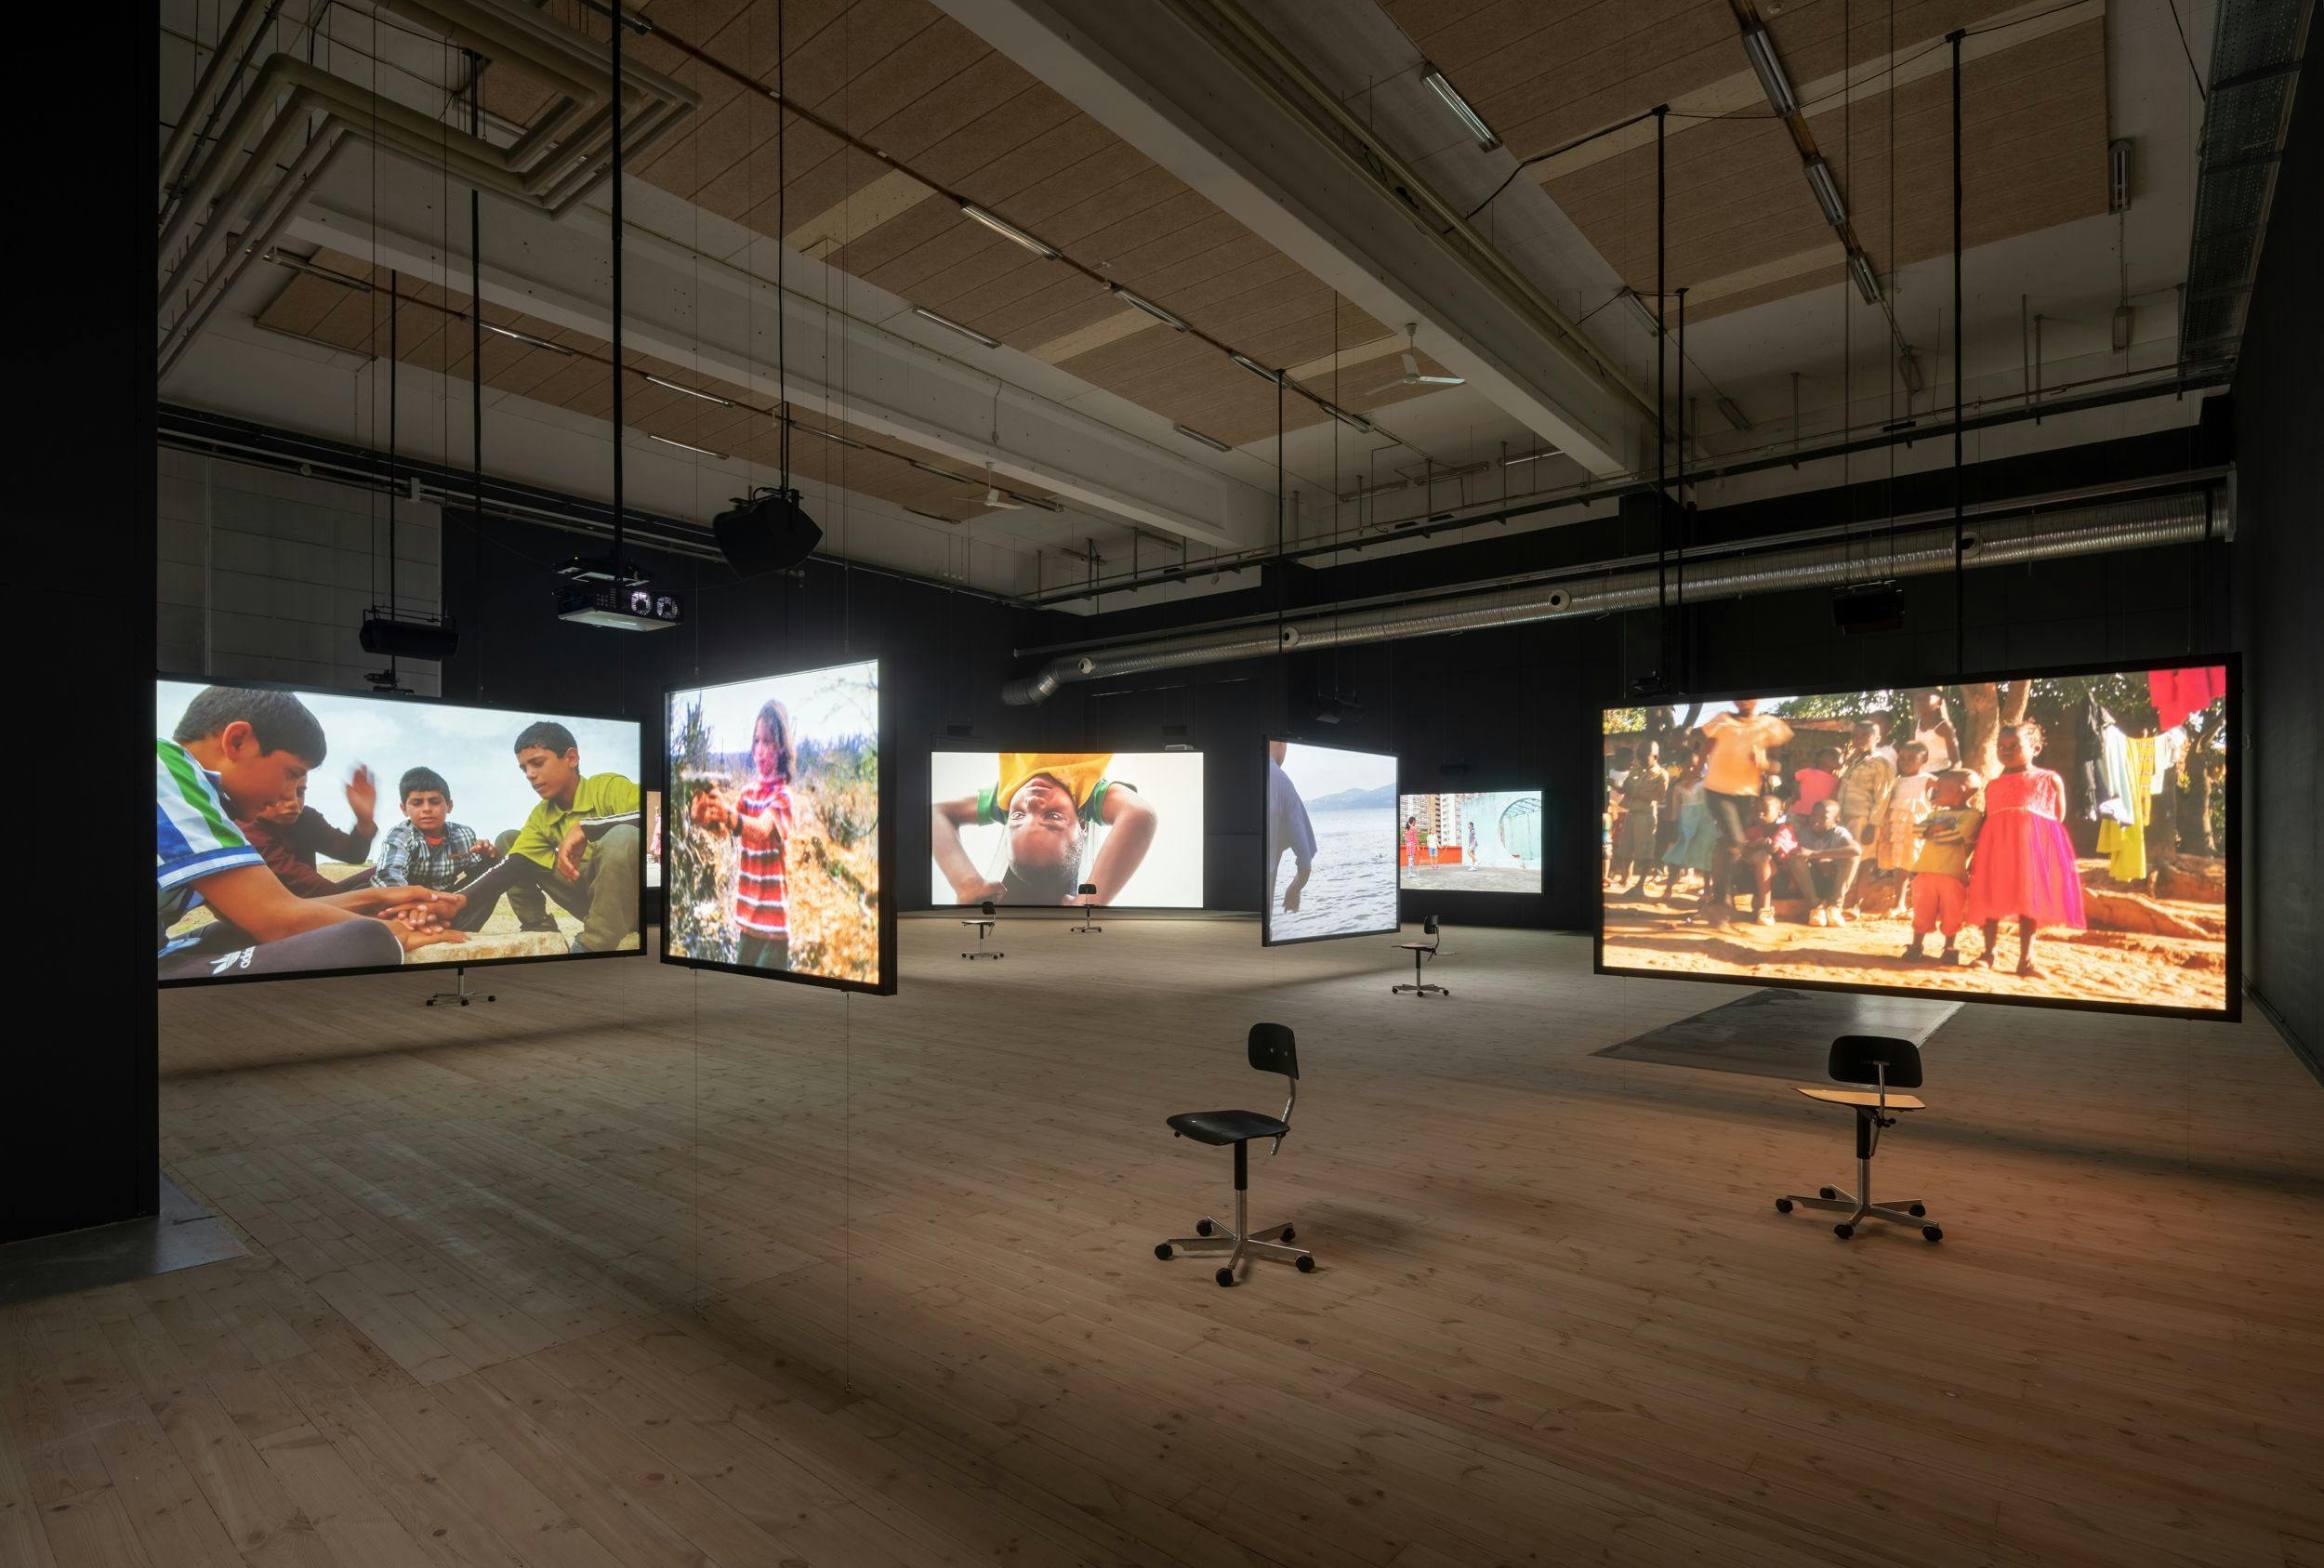 An installation view of an exhibition titled Francis Alÿs: Children’s Games at Copenhagen Contemporary, 2022